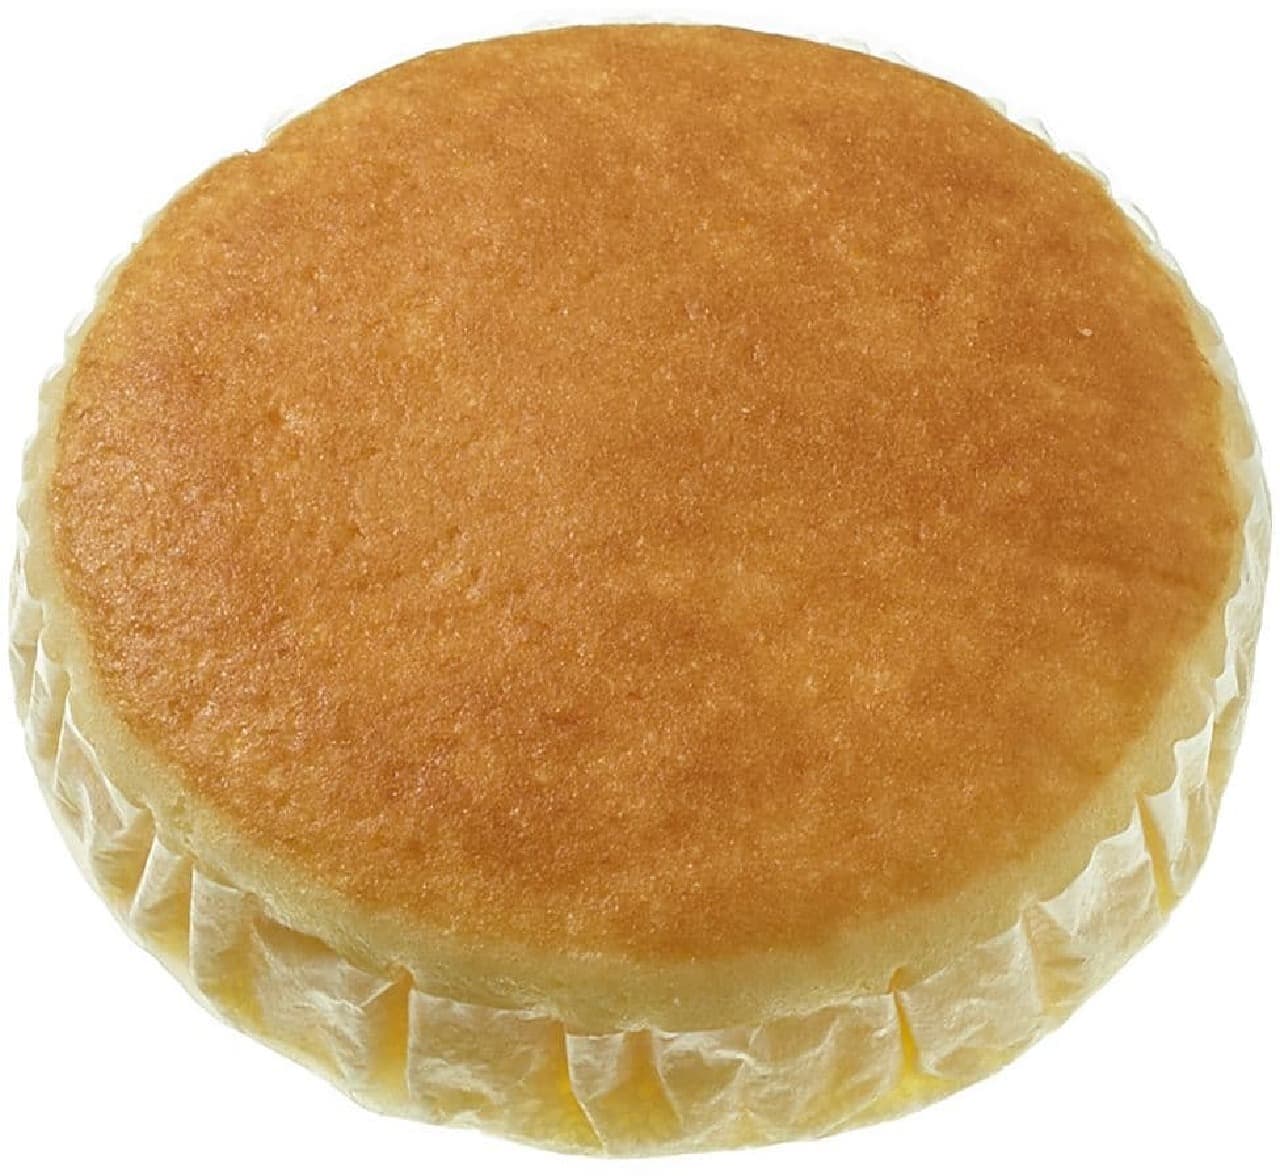 7-ELEVEN "7P Steamed Cake with Three Kinds of Aged Cheese